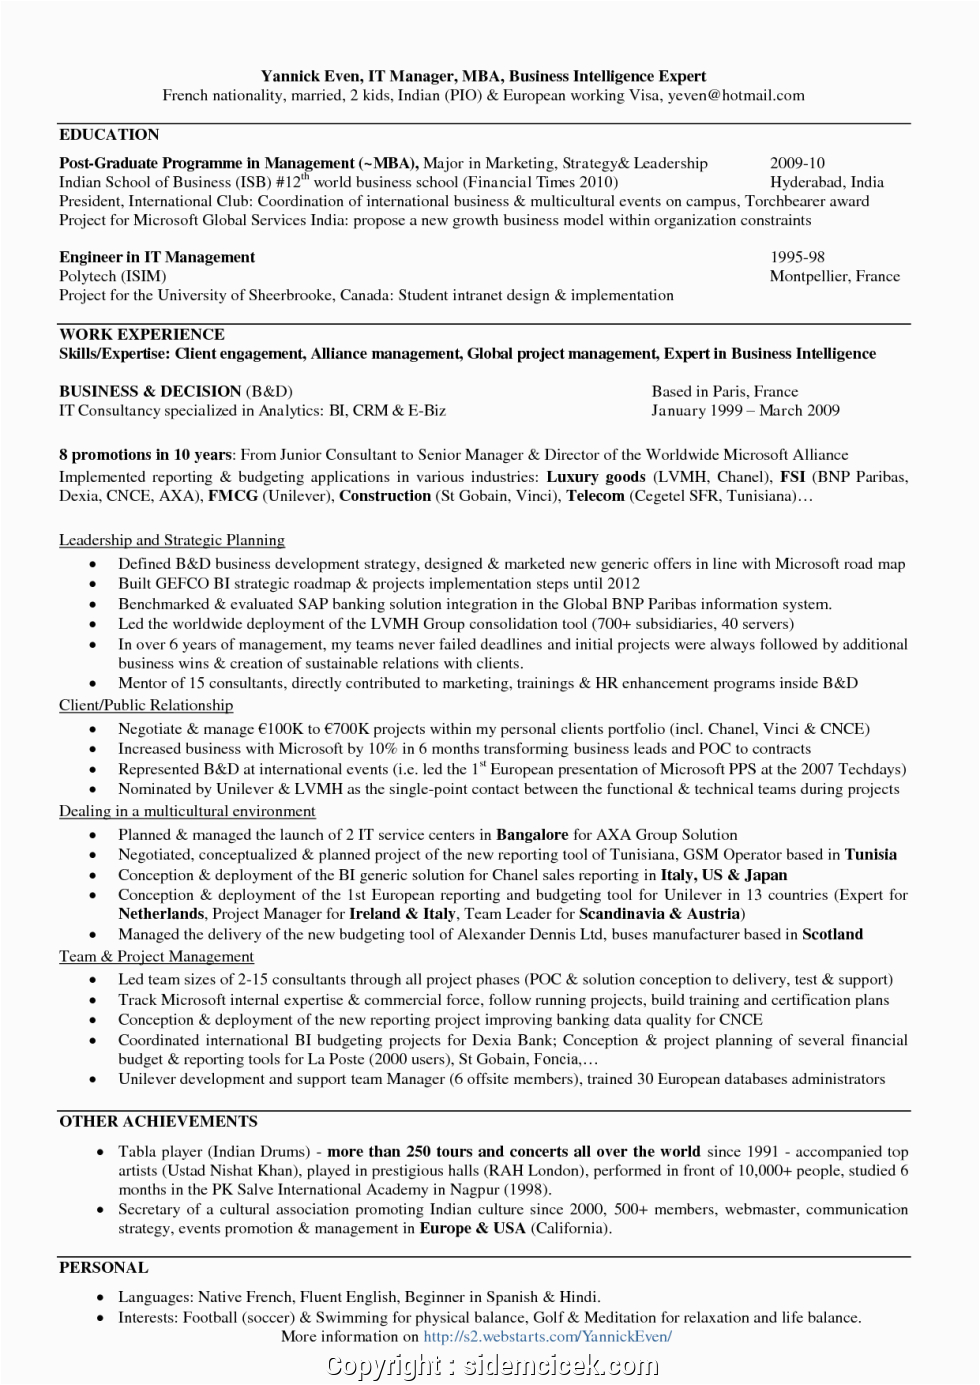 Mba Hr Resume Samples for Experienced Creative Mba Hr Resume format Mba Hr Resume format for